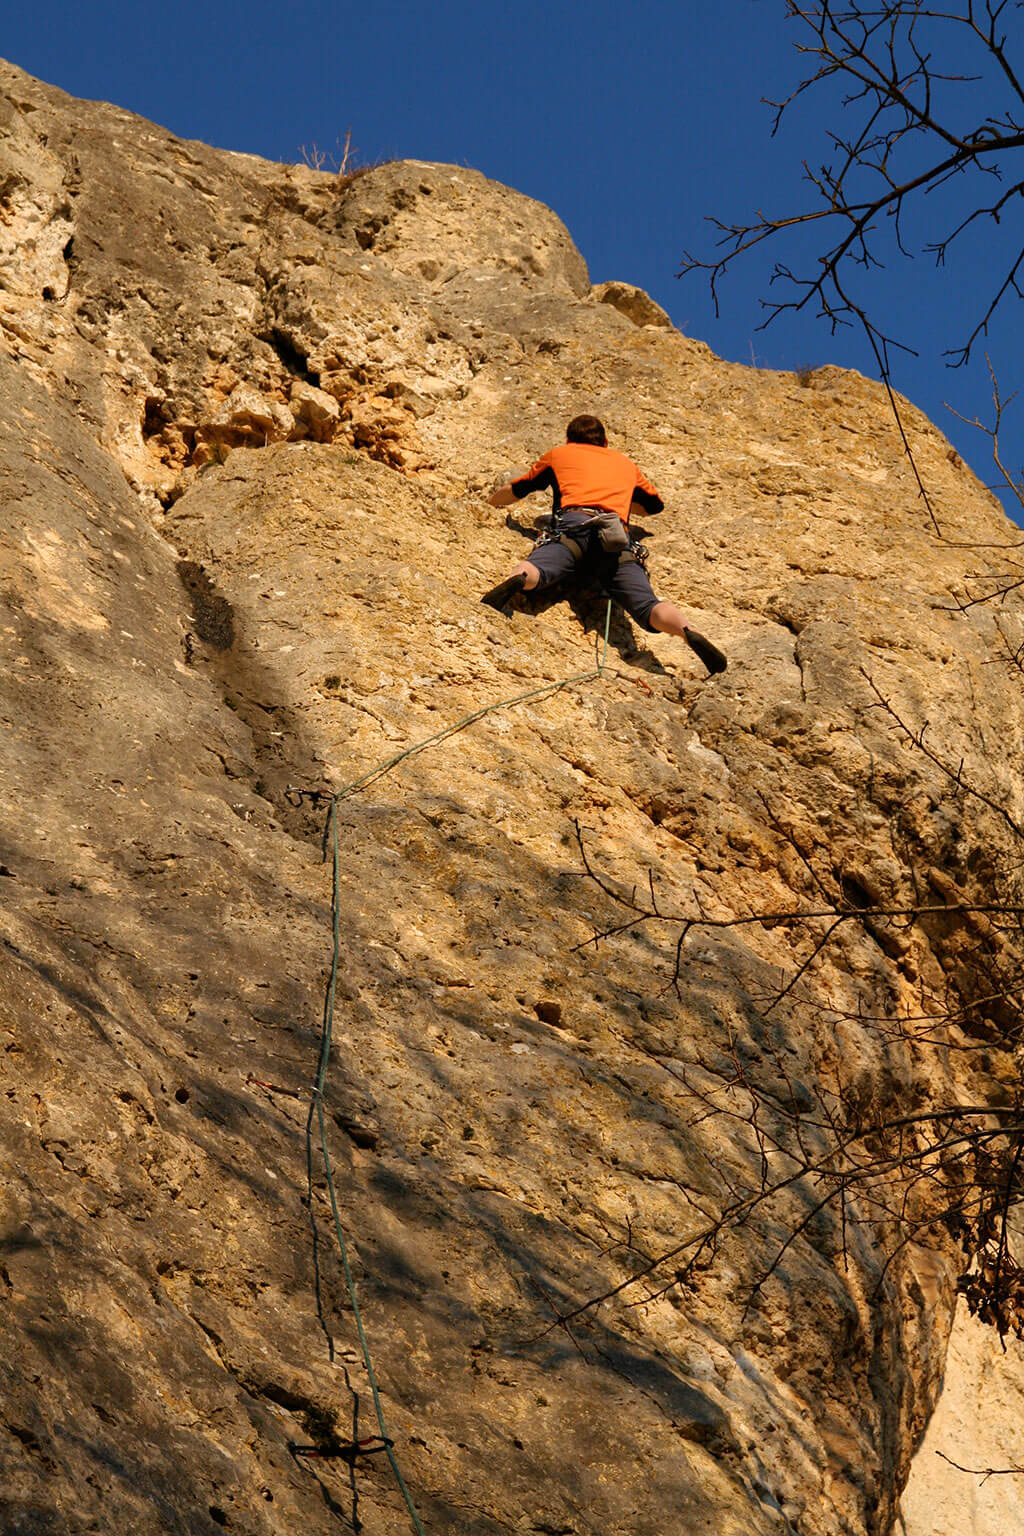 Climbing near Chateau de Mailly